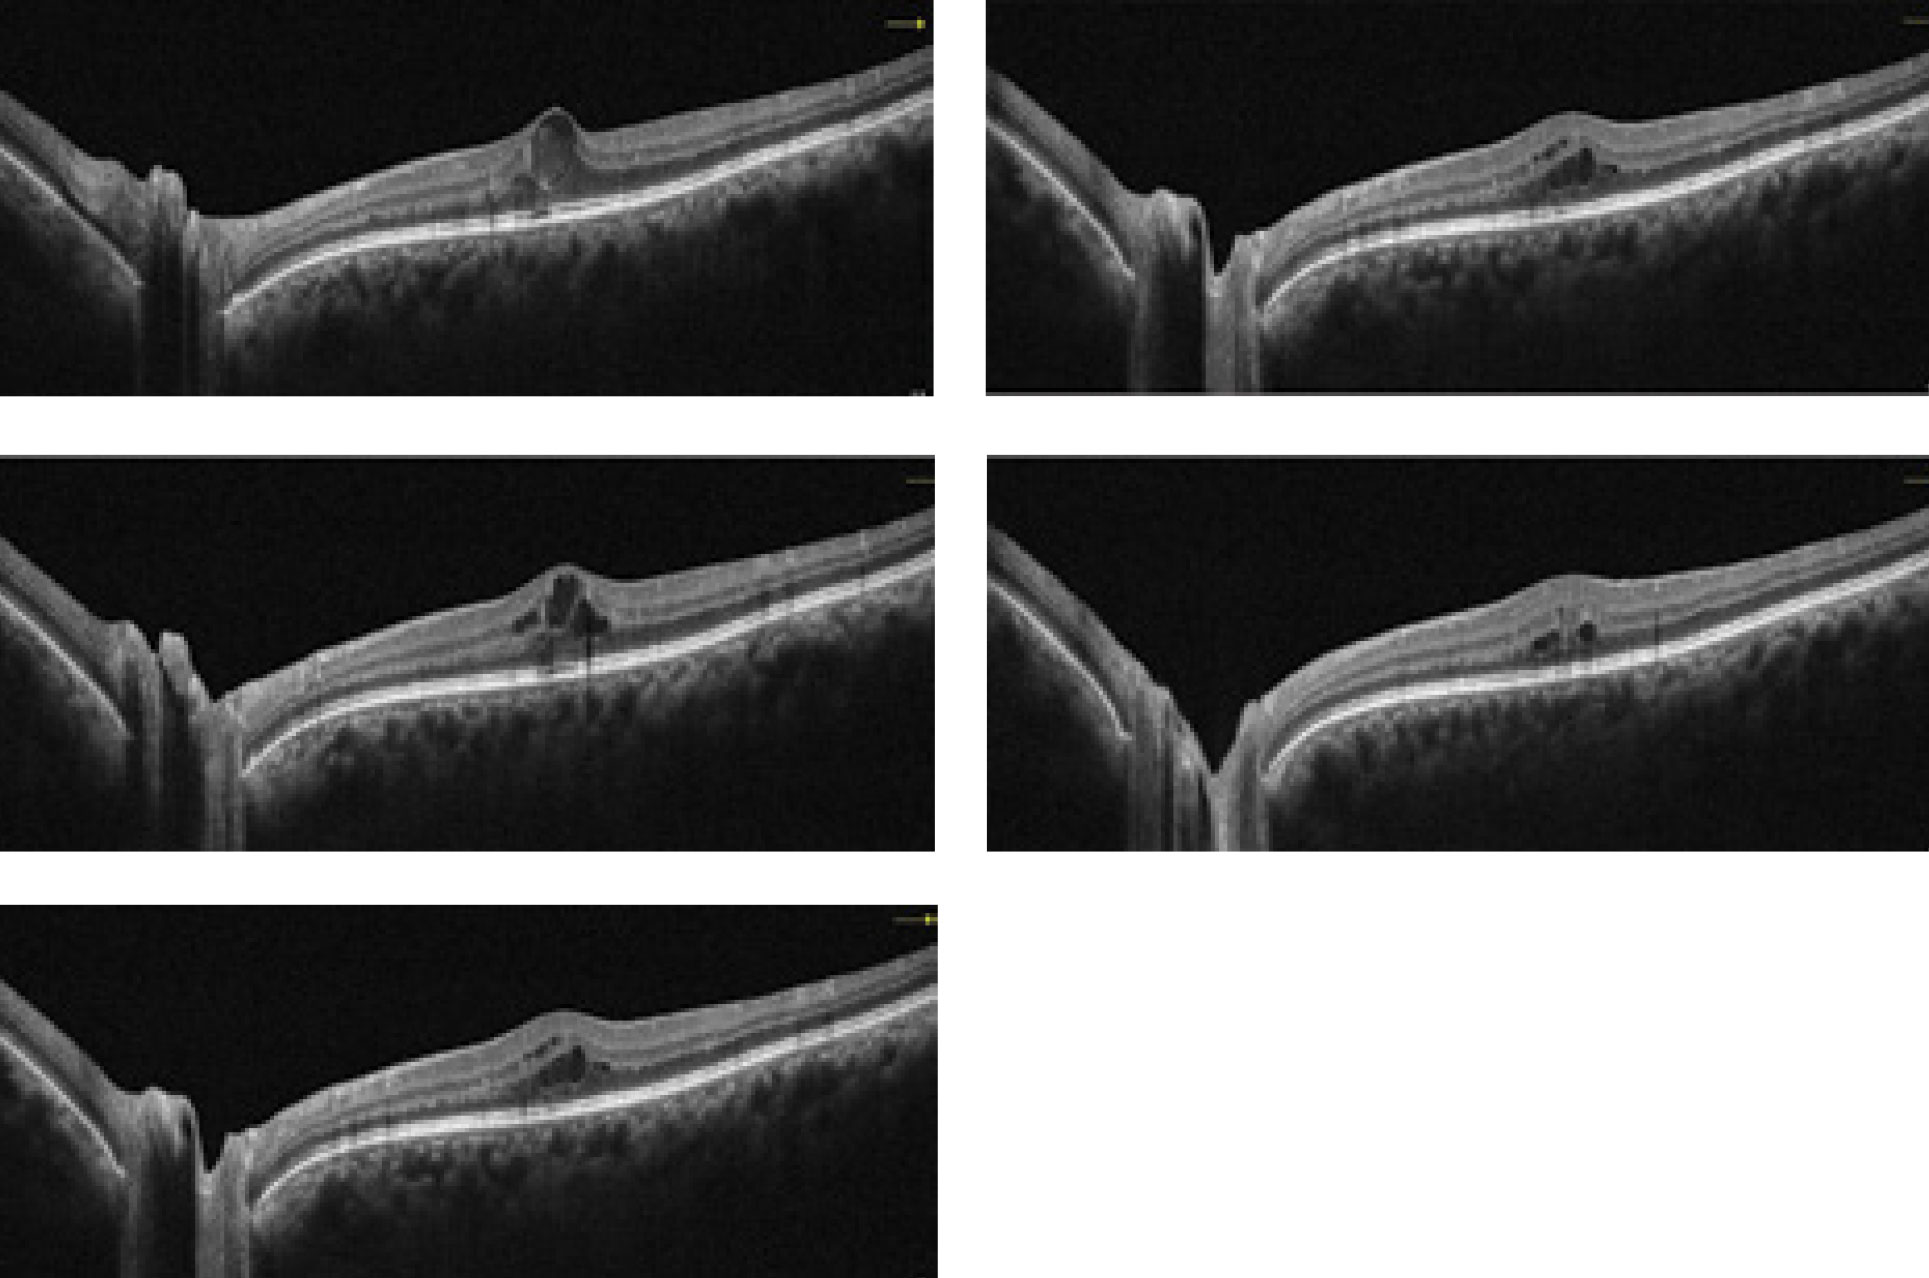 This collection of OCT images exemplify how the technology is able to portray a diabetic retinopathy patient through the course of several visits.